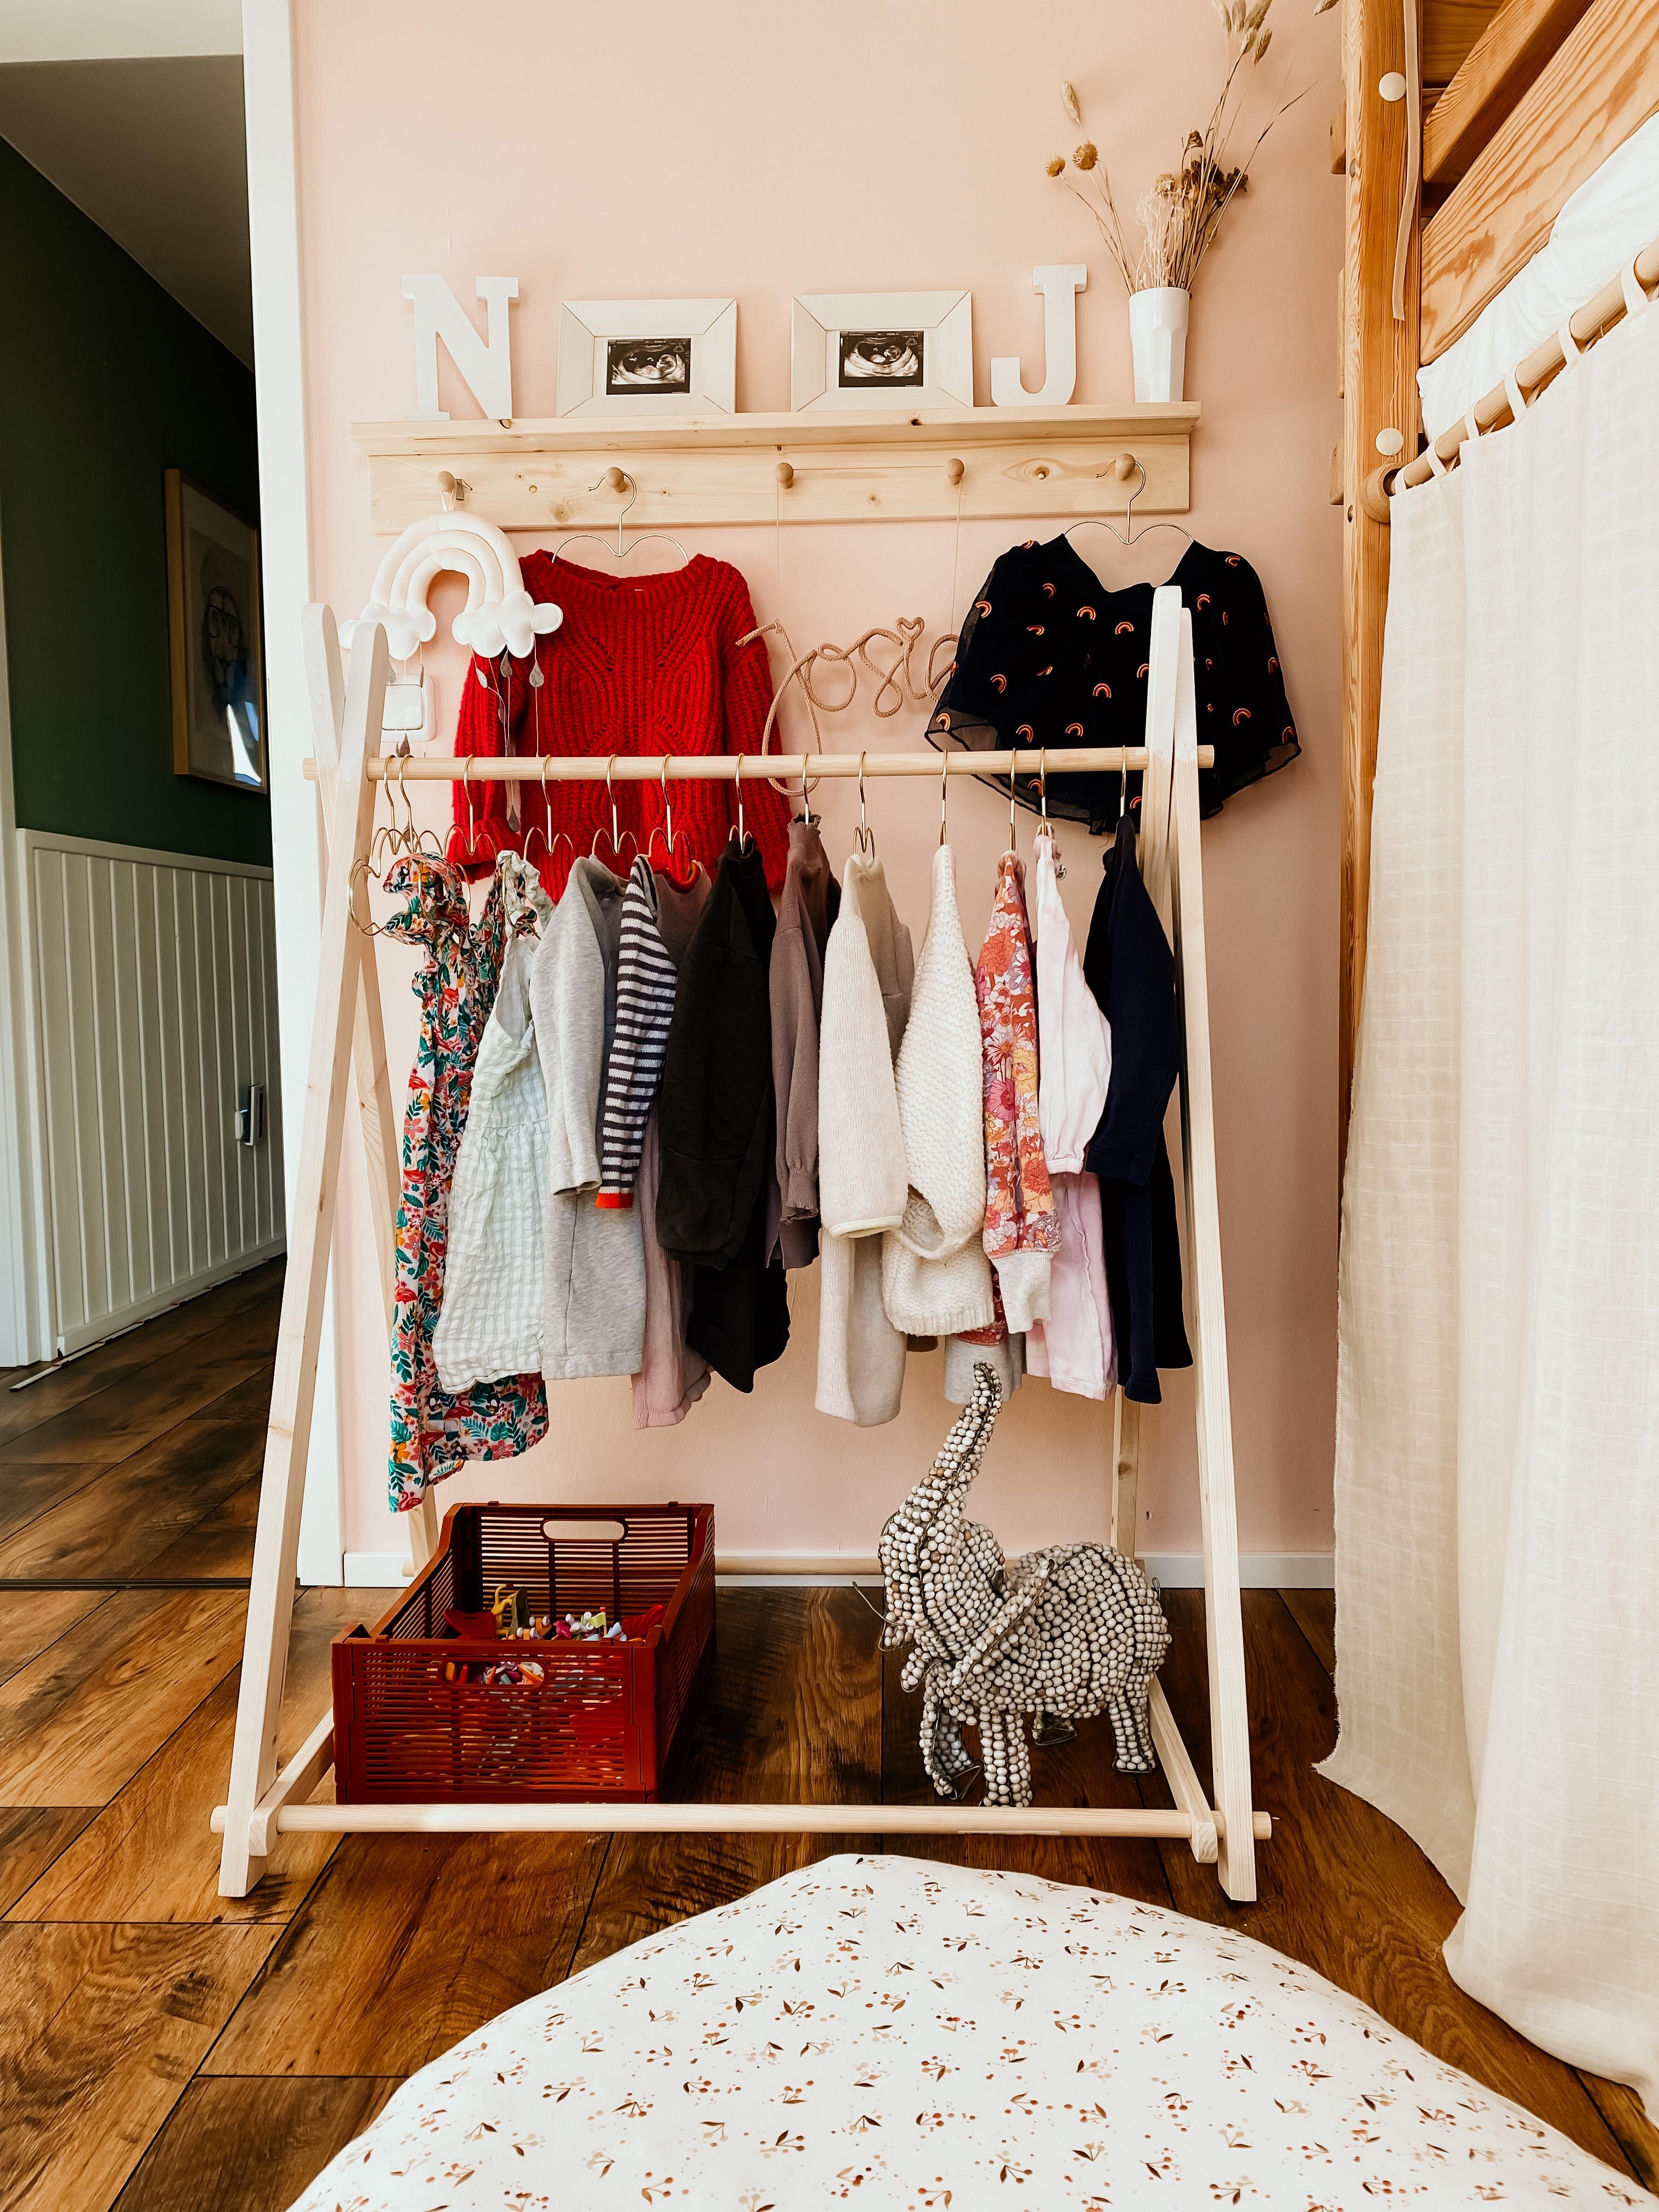 Girls room wouldn’t be complete without their own dress corner DIY shelf and hanger #mädchengarderobe #diyshelf 